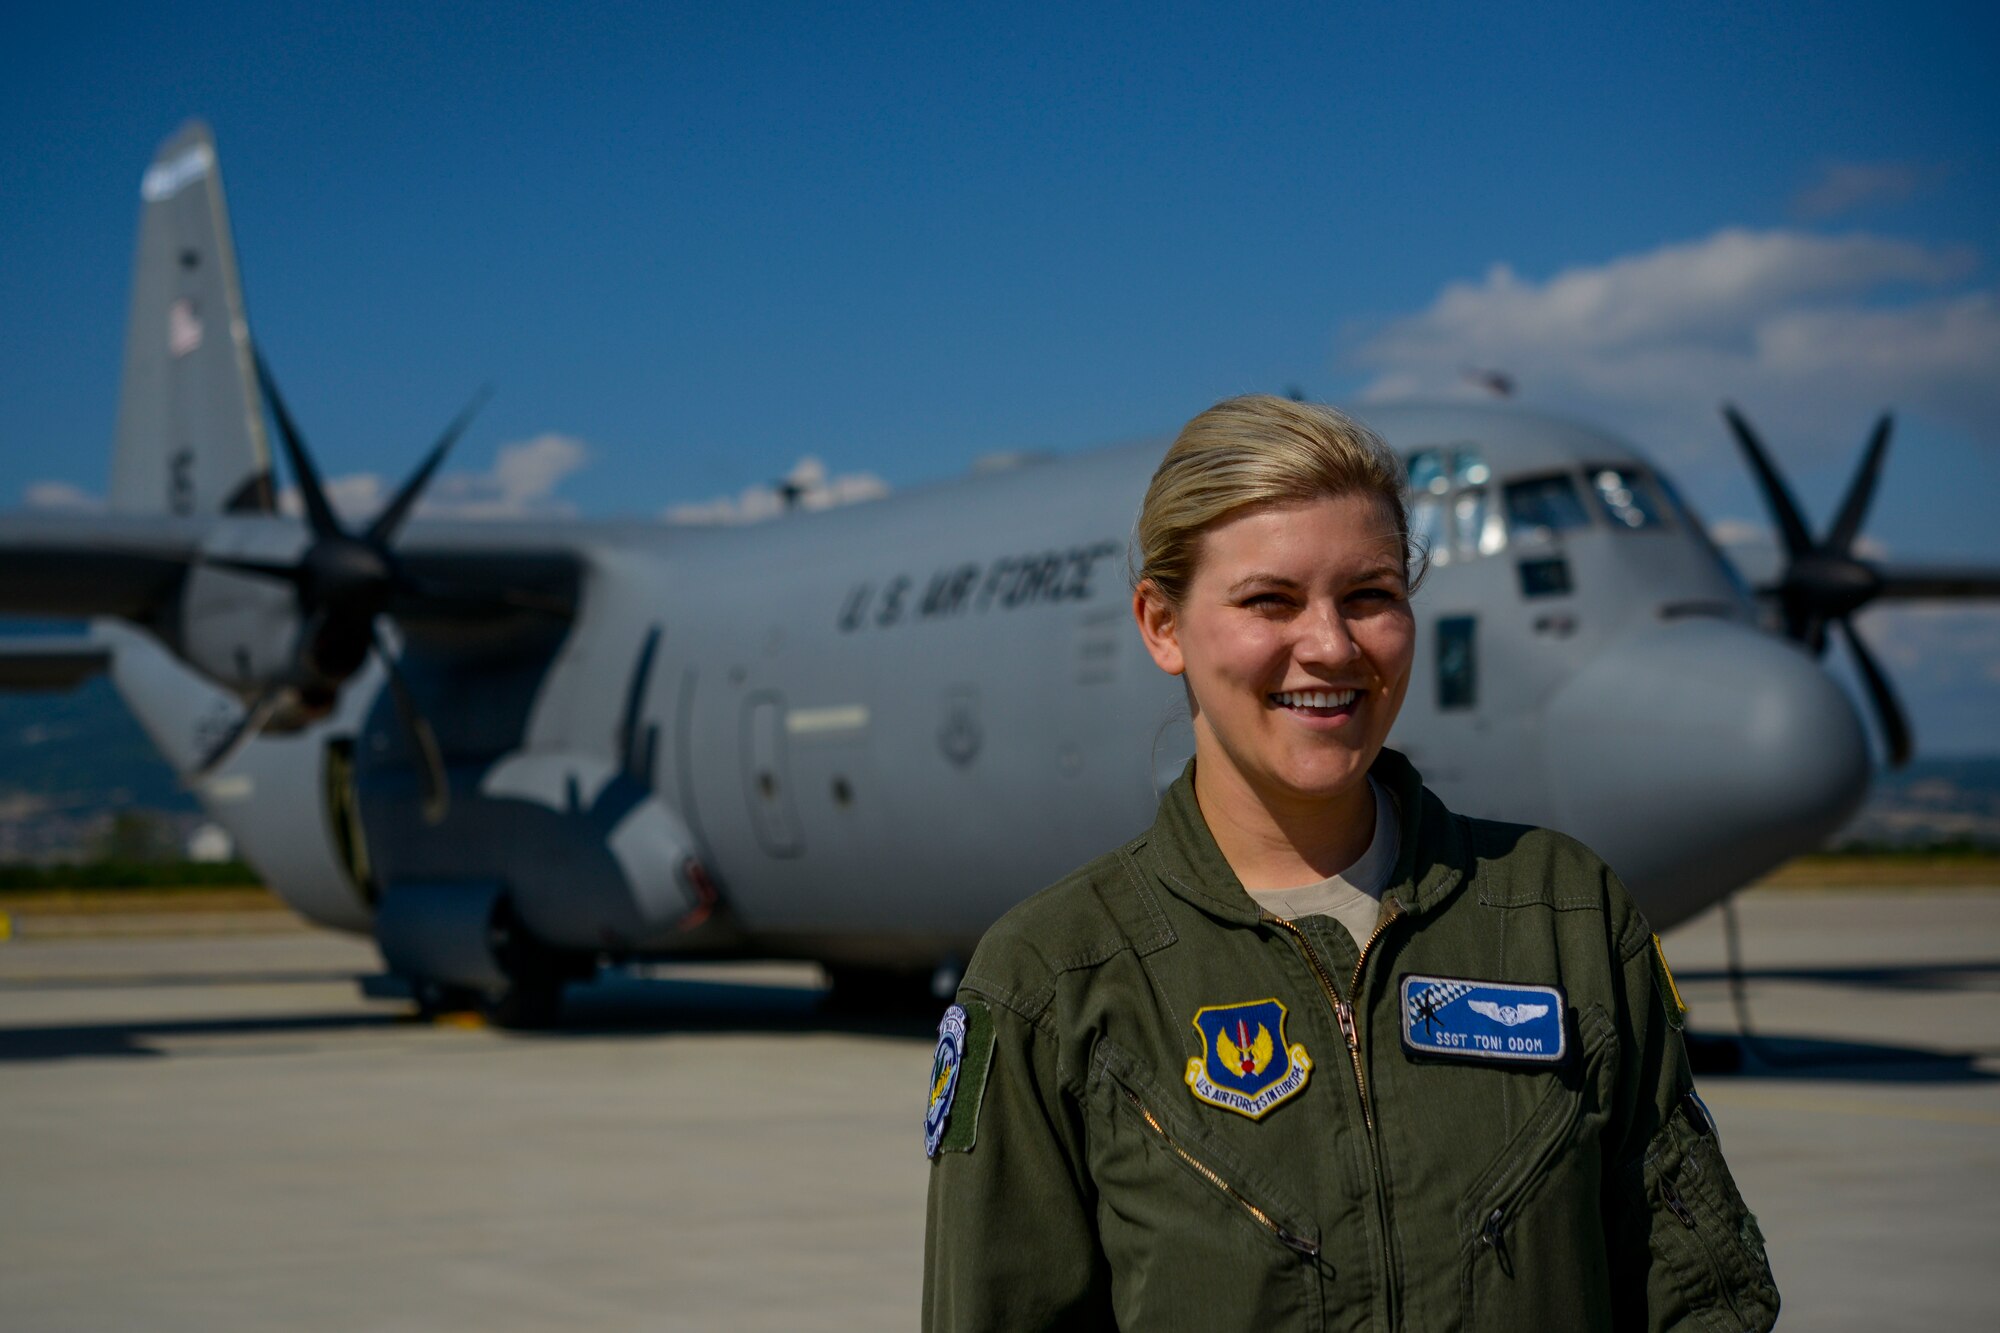 Staff Sgt. Toni Odom, 37th Airlift Squadron loadmaster and Thracian Summer 2016 ramp coordinator, stands in front of a C-130J Super Hercules July 21, 2016, at Plovdiv Airport, Bulgaria. Odom was one of two ramp coordinators for Thracian Summer 2016, where she was in charge of 26 personnel for the two-week forward training deployment. (U.S. Air Force photo/Senior Airman Nicole Keim) 